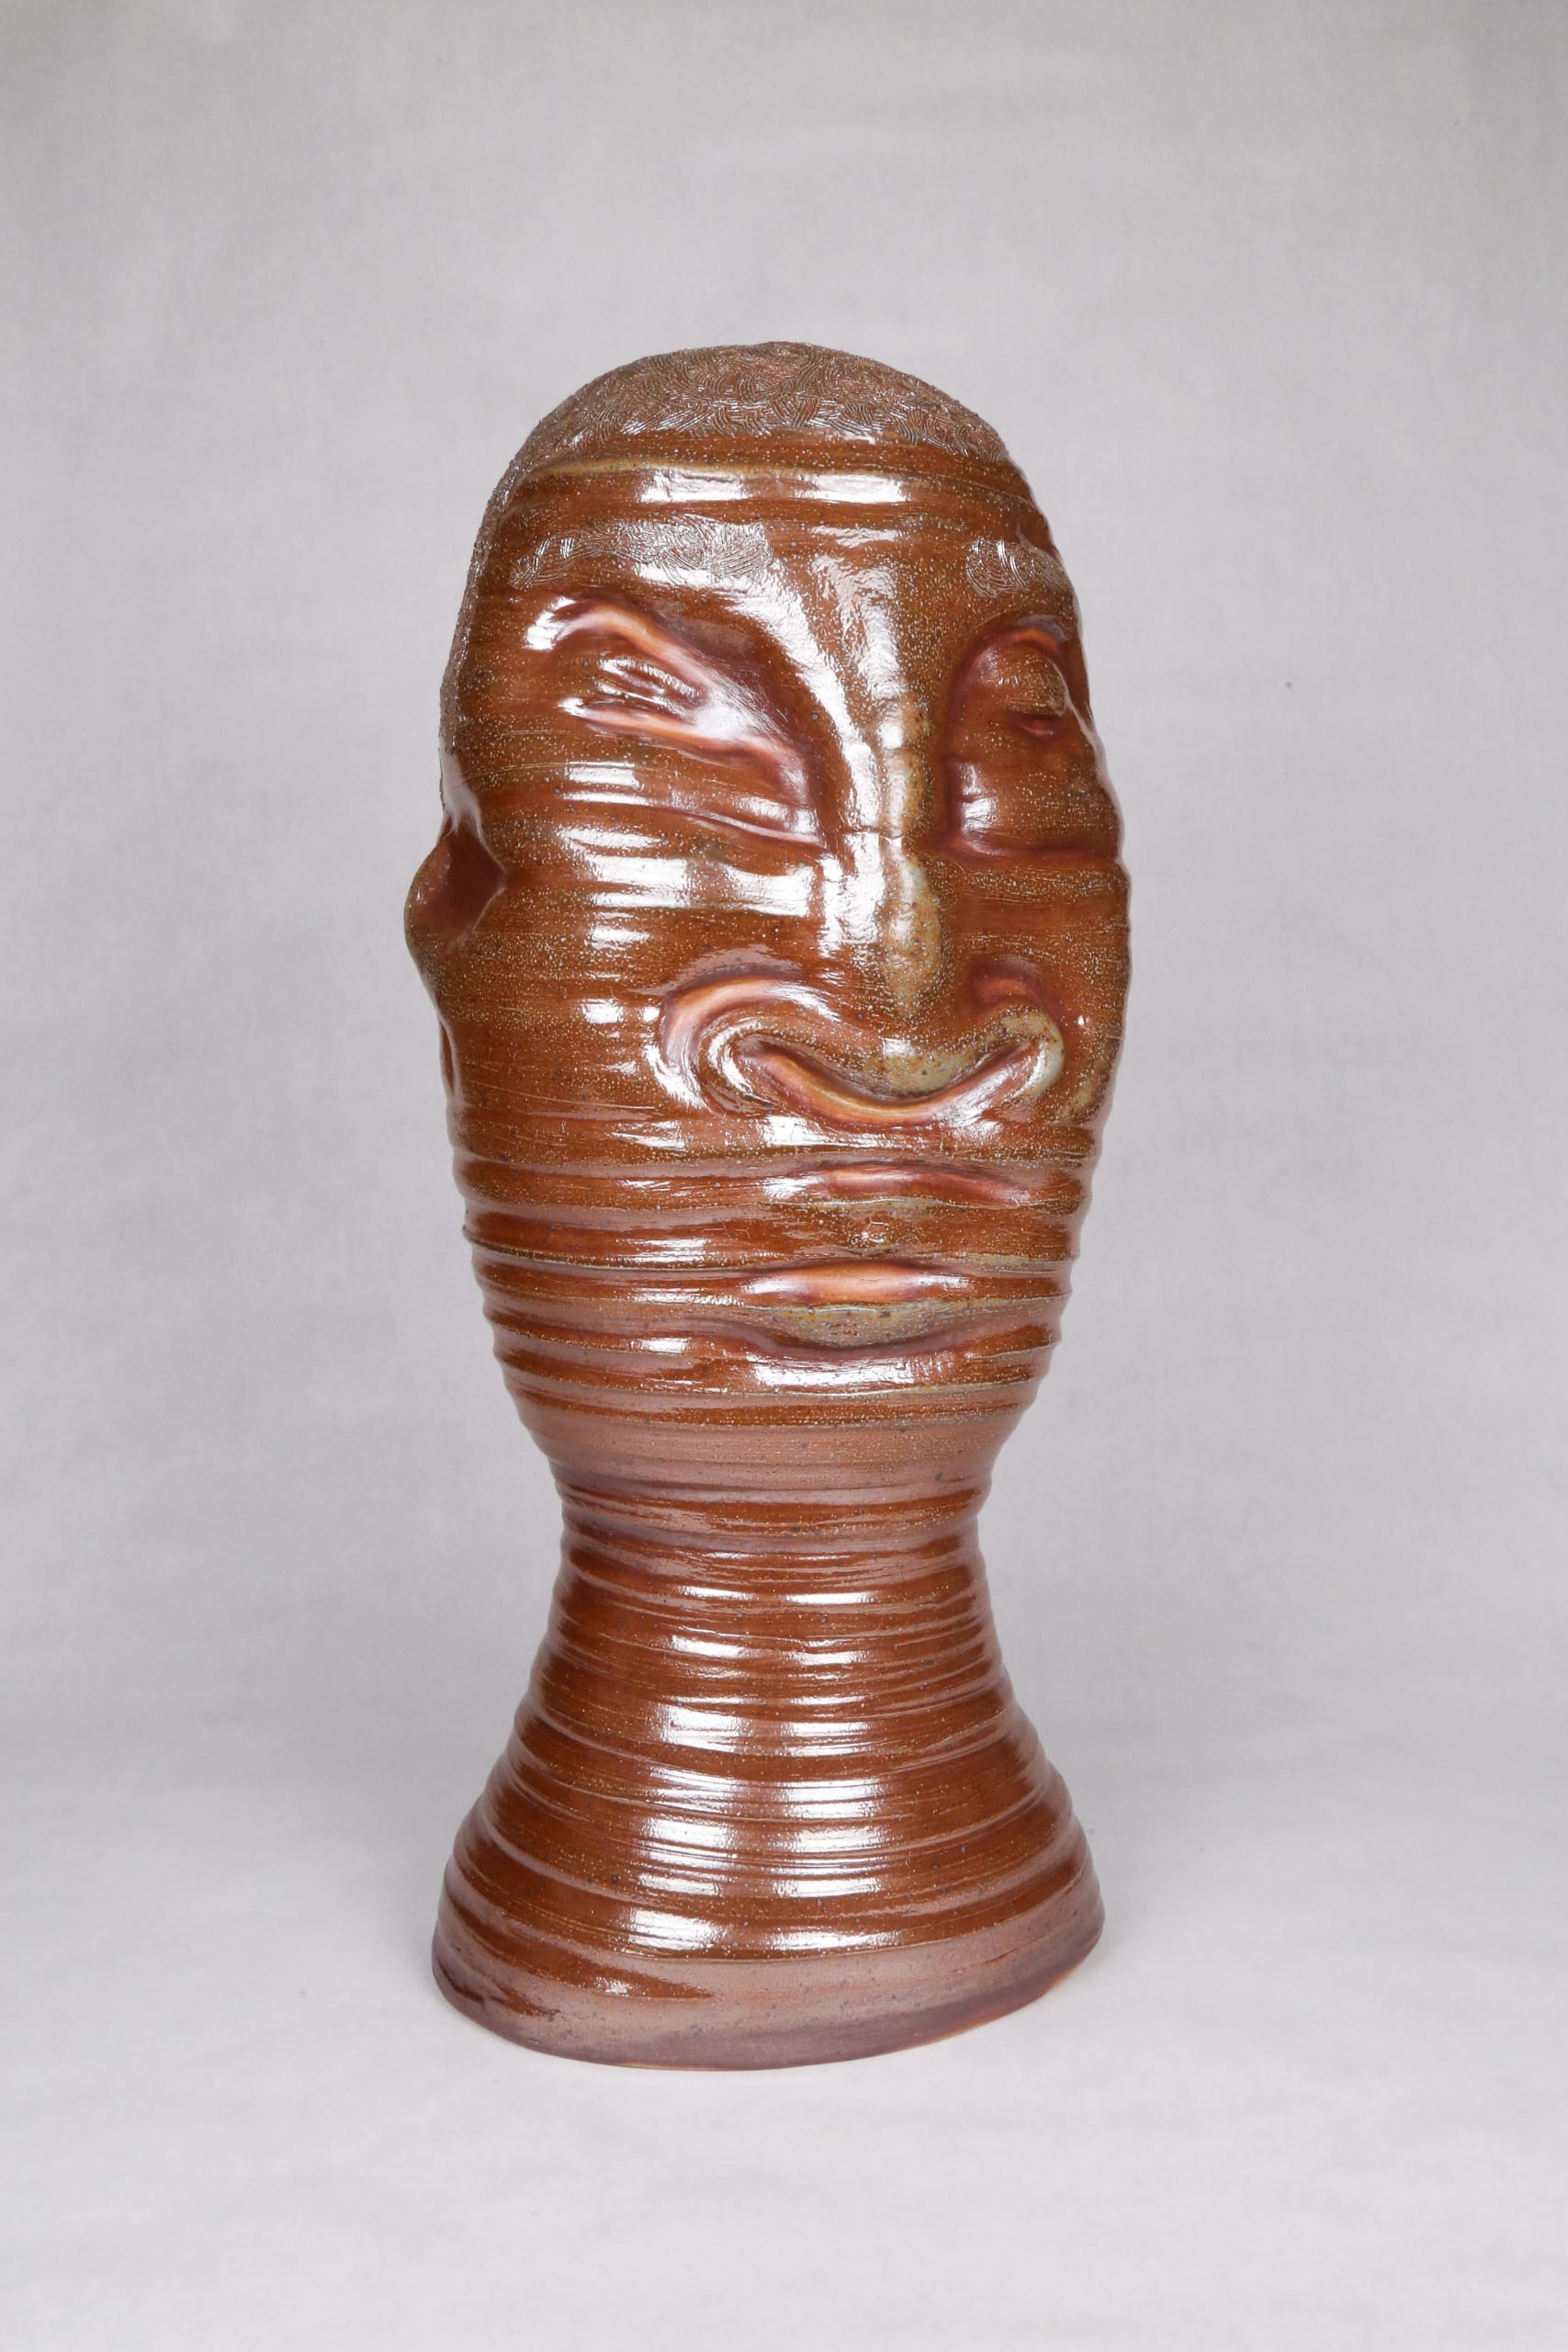 Color photograph with a frontal view of an abstract ceramic portrait head, with distinctive ridges wrapping around the circumfrance of the head. The object is monochromatic (warm brown) with a light, luminescent glaze applied to its surface. It appears as though it was made on a spinning potter‘s wheel.